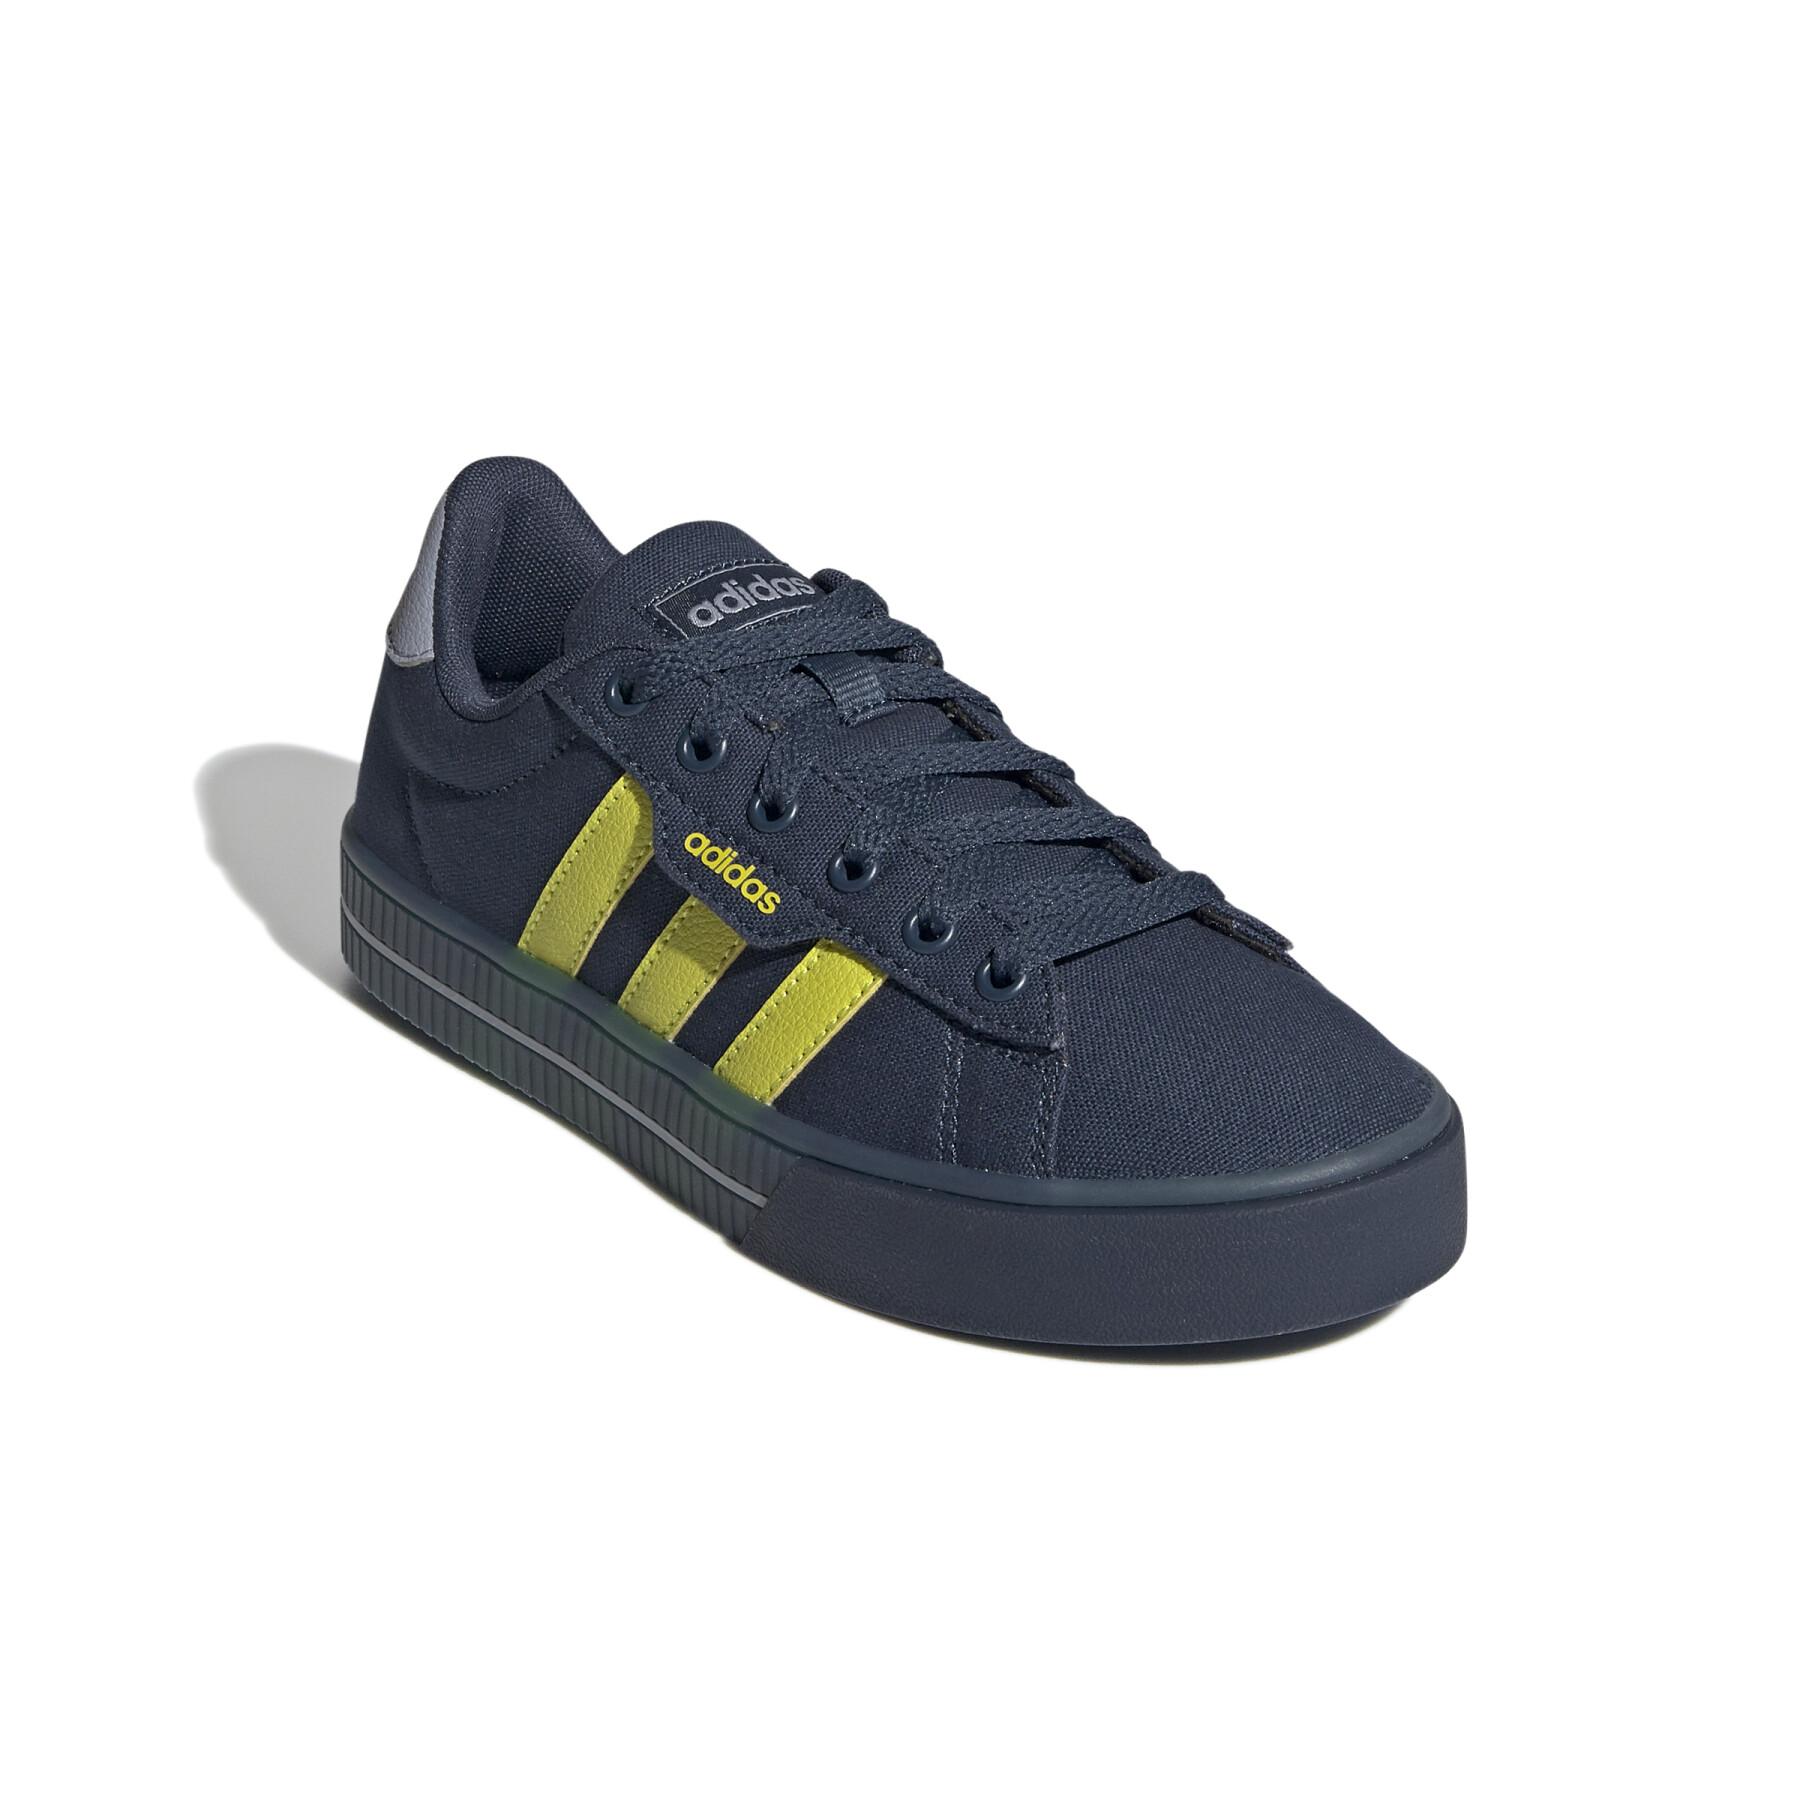 Children's sneakers adidas Daily 30